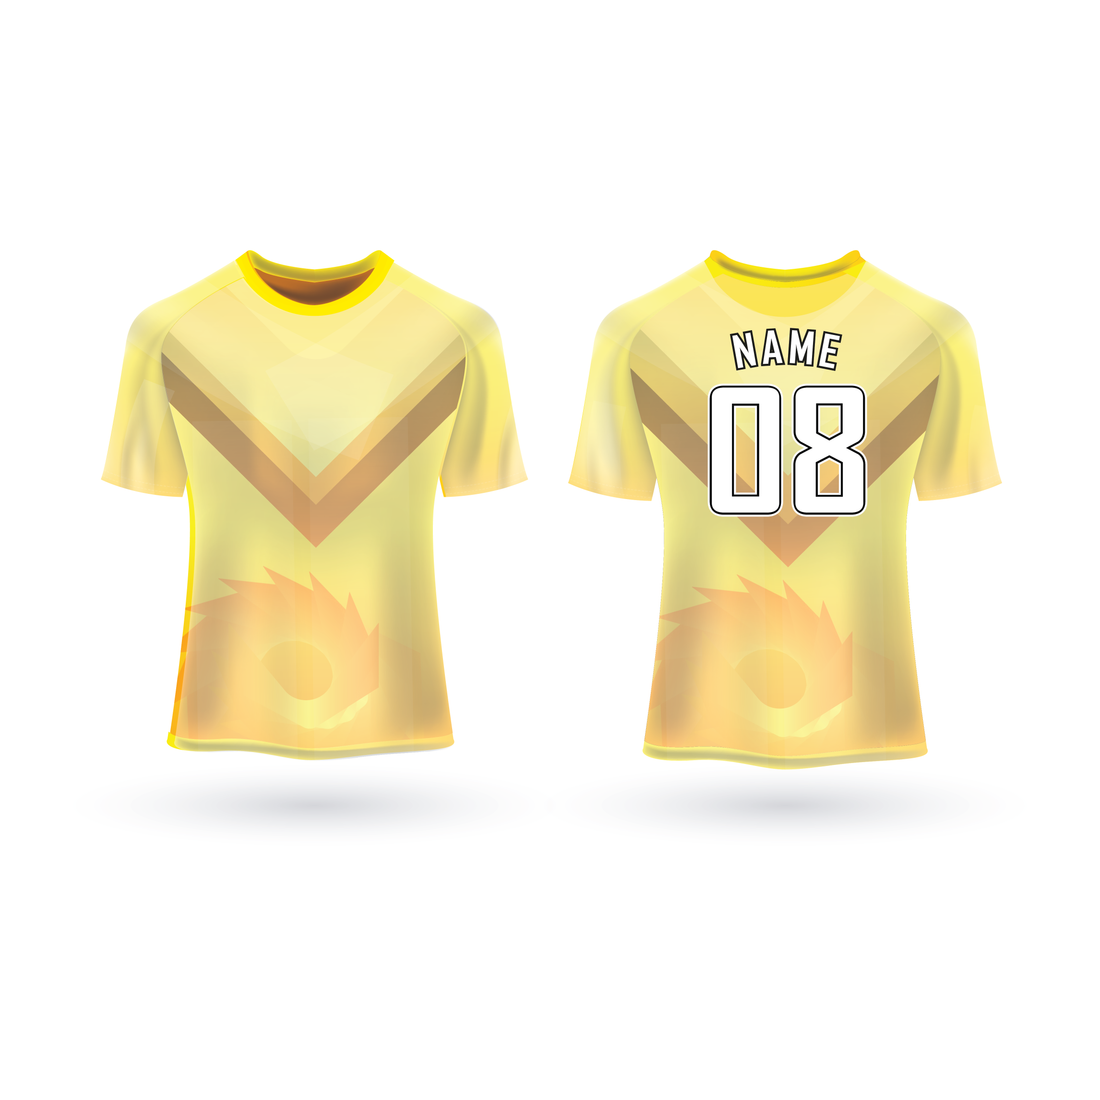 NEXT PRINT All Over Printed Customized Sublimation T-Shirt Unisex Sports Jersey Player Name & Number, Team Name NP50000290